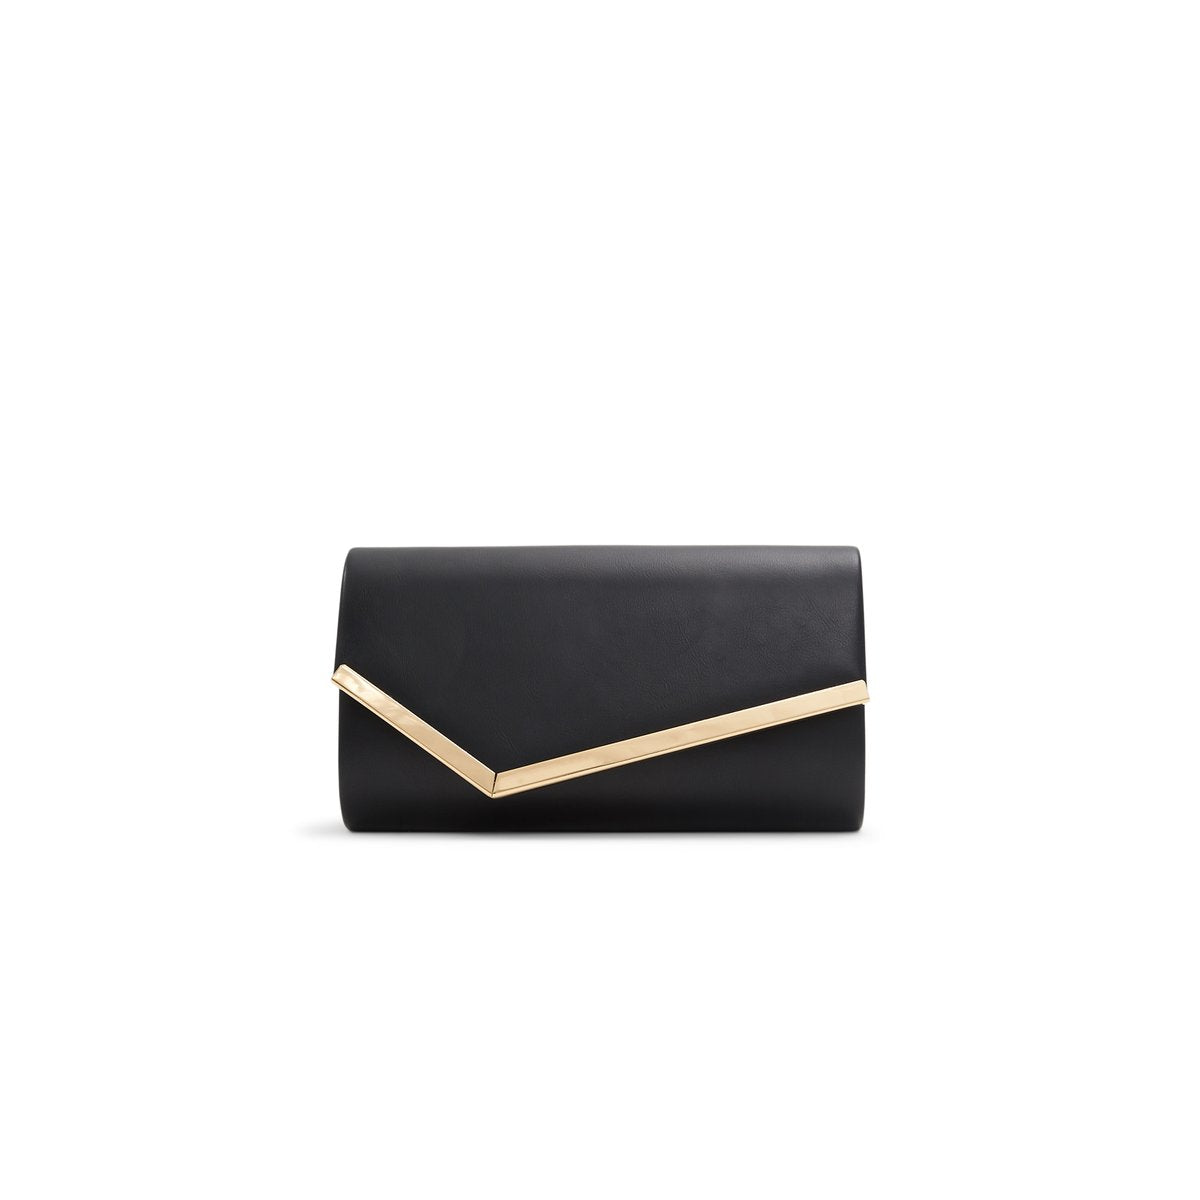 Shop Wristlets and Clutches Online - Louenhide North America